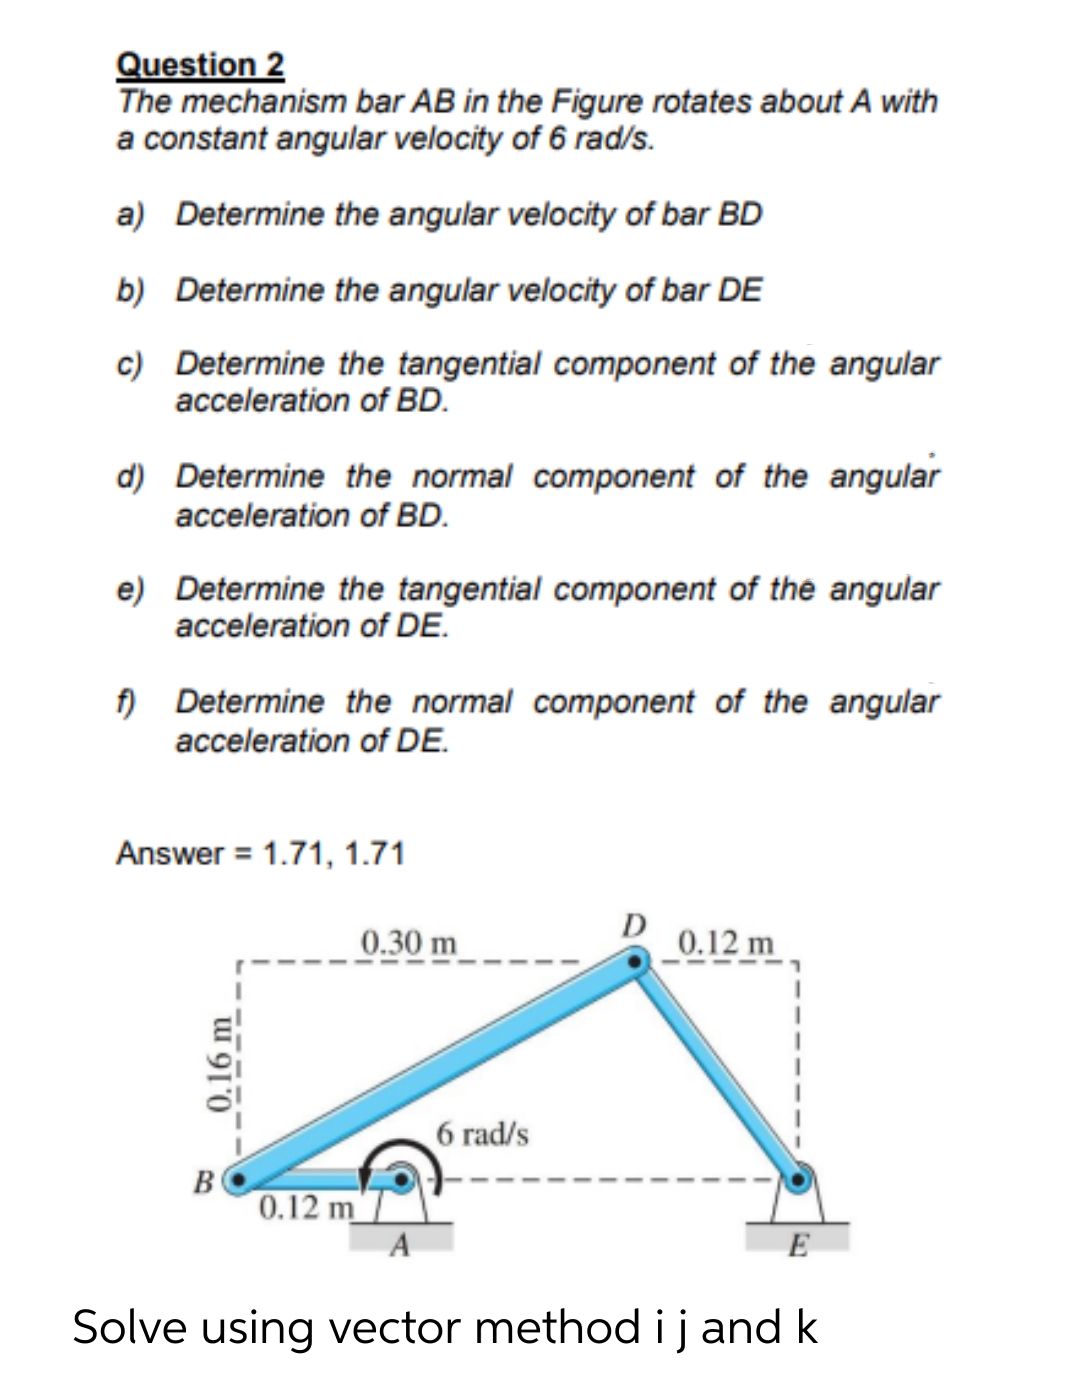 Question 2
The mechanism bar AB in the Figure rotates about A with
a constant angular velocity of 6 rad/s.
a) Determine the angular velocity of bar BD
b) Determine the angular velocity of bar DE
c) Determine the tangential component of the angular
acceleration of BD.
d) Determine the normal component of the angular
acceleration of BD.
e) Determine the tangential component of the angular
acceleration of DE.
f) Determine the normal component of the angular
acceleration of DE.
Answer = 1.71, 1.71
0.30 m
D
0.12 m
6 rad/s
B
0.12 m
A
E
Solve using vector method ij and k
